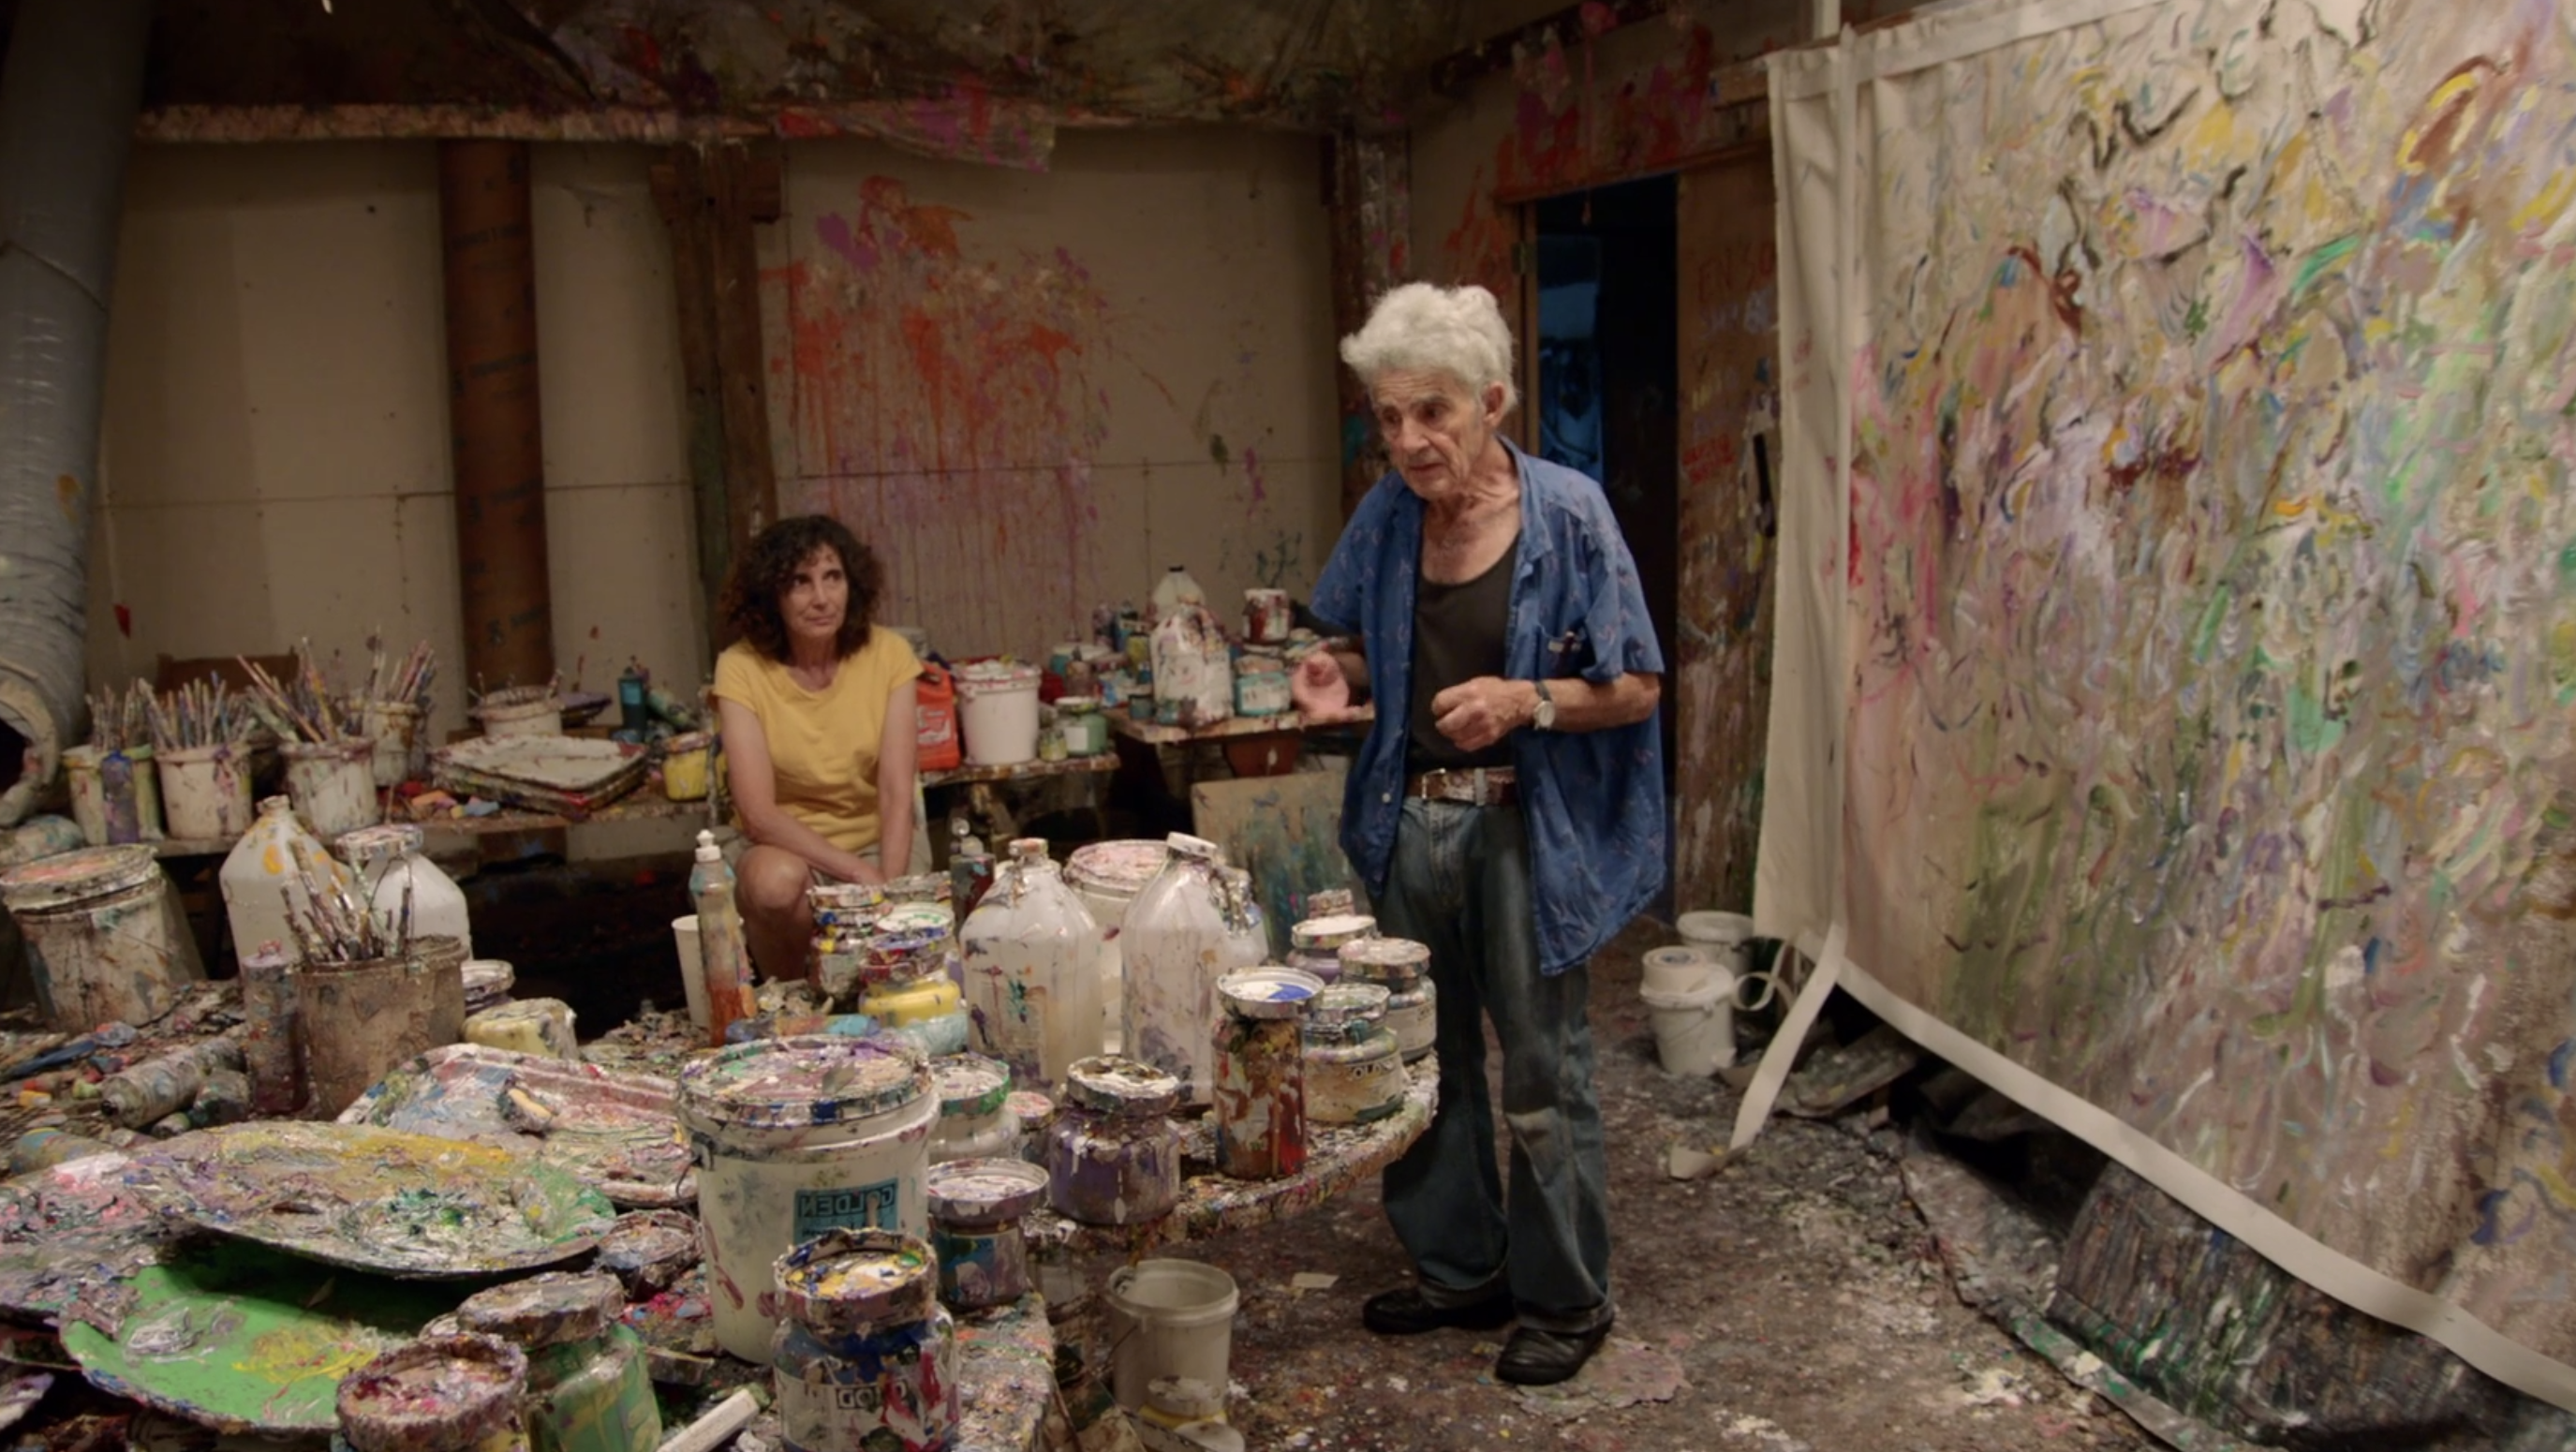 Screenshot of Larry Poons in The Price of Everything. Image couretsy of HBO.